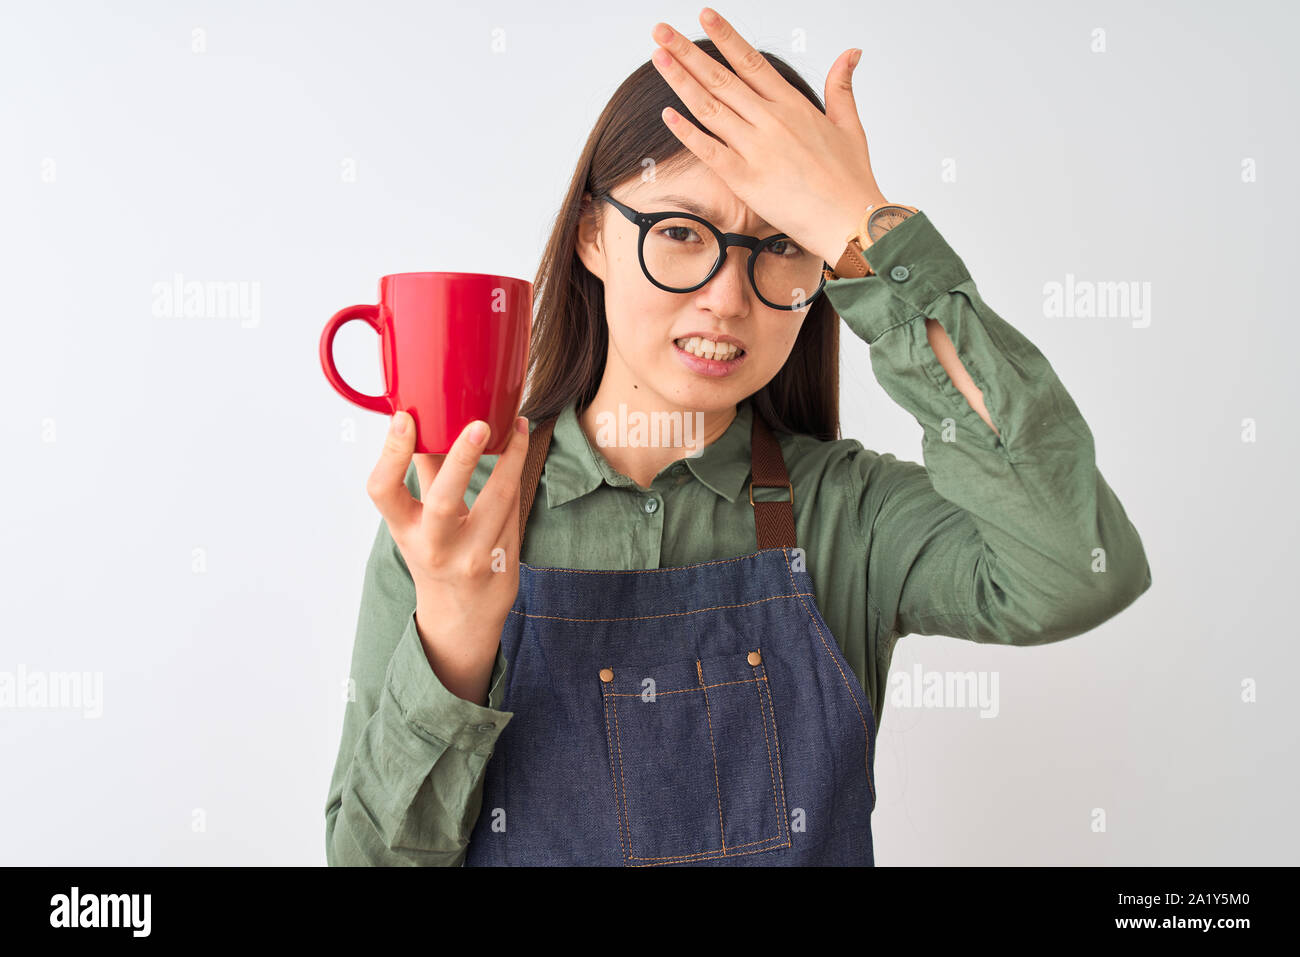 Chinese barista woman wearing apron glasses drinking coffee over isolated white background stressed with hand on head, shocked with shame and surprise Stock Photo